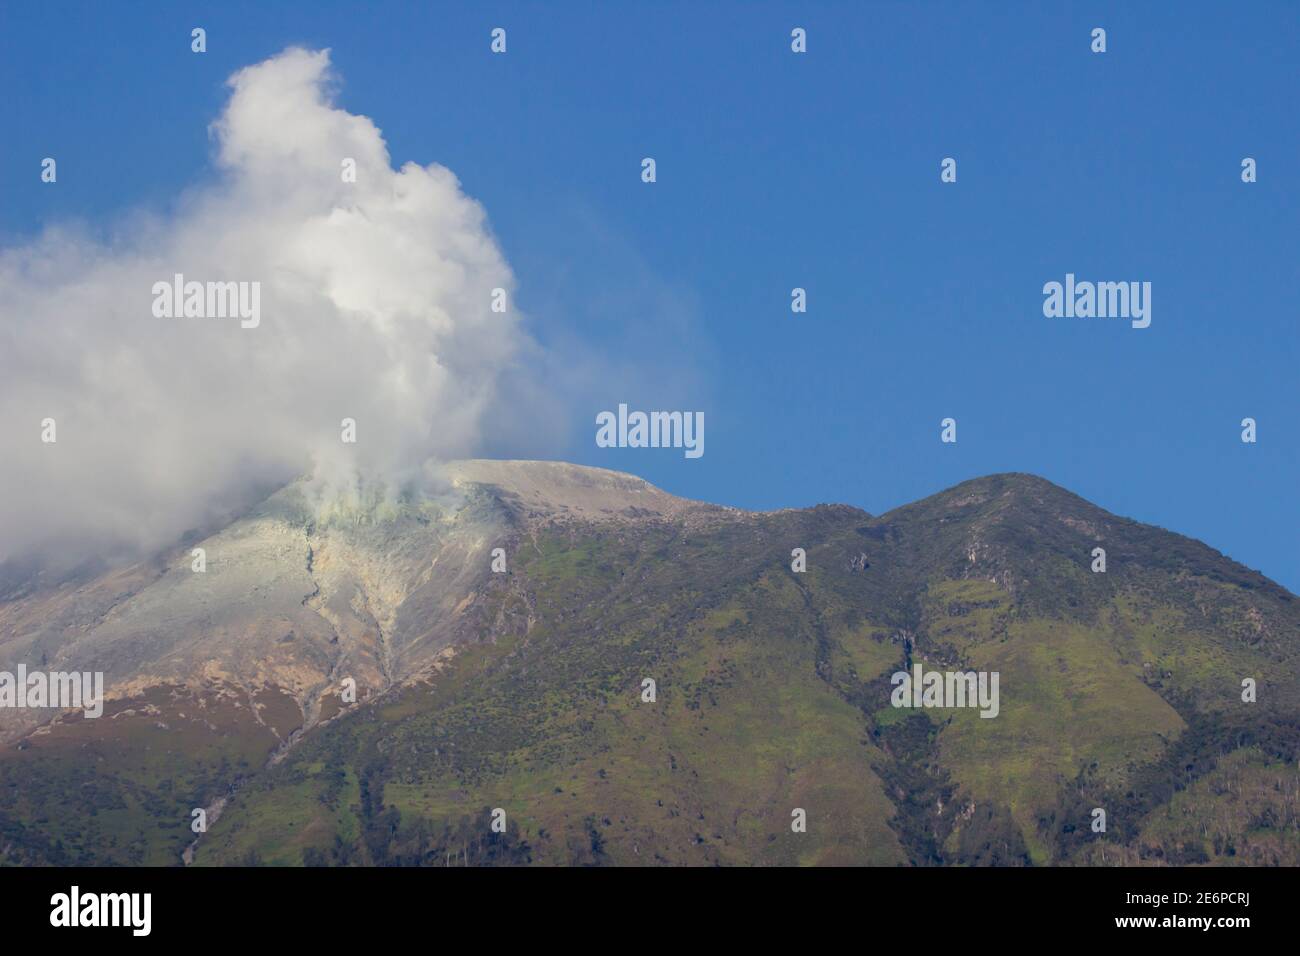 Sulfur smoke on the top of Mount Welirang, East Java, Indonesia. Mount Welirang is an active volcano with an altitude of 3156m above sea level Stock Photo